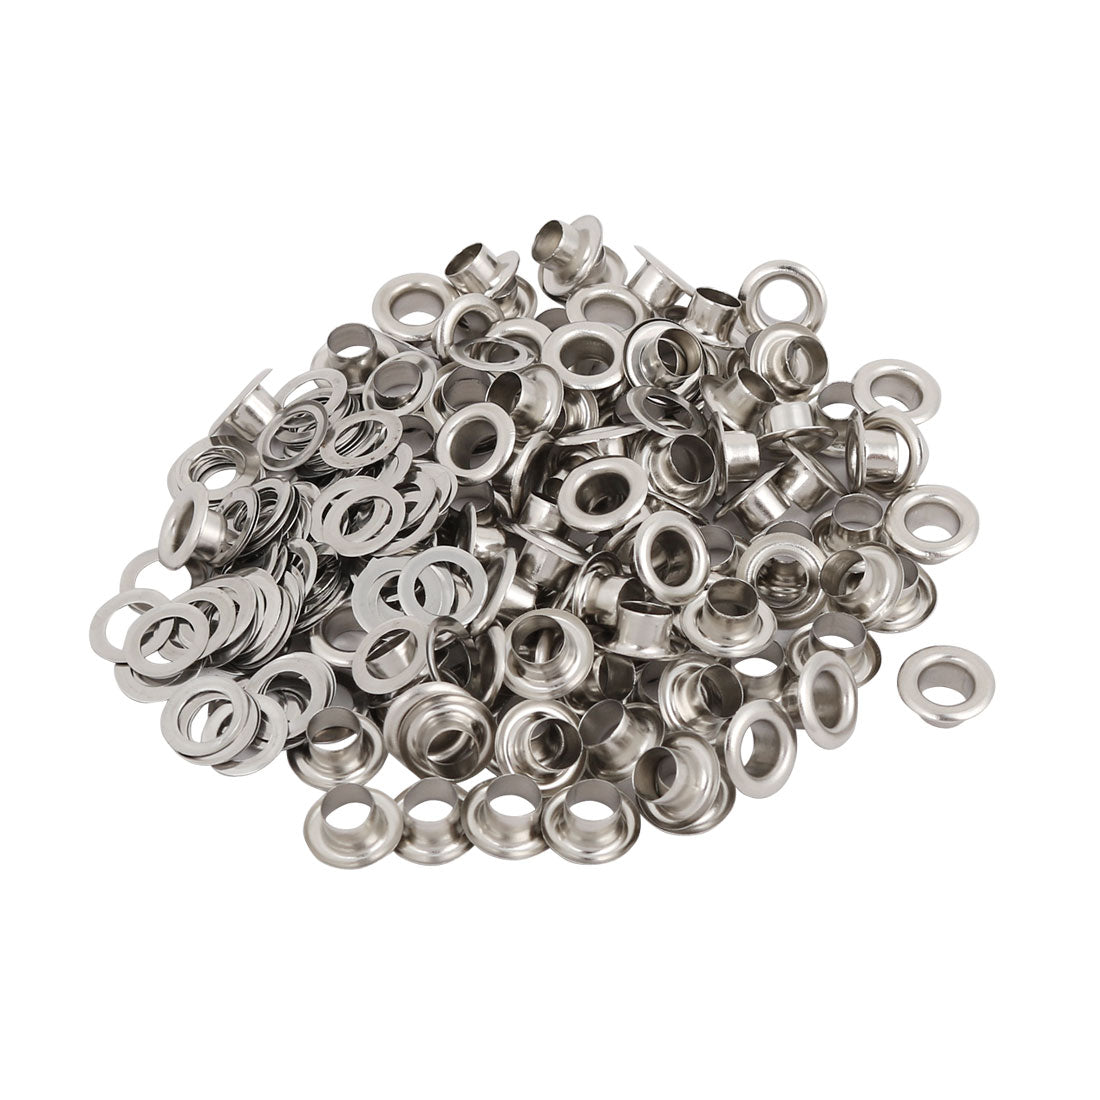 uxcell Uxcell 100pcs 4.5mm Iron Eyelet Grommets Silver Tone w Washers for Clothes Leather